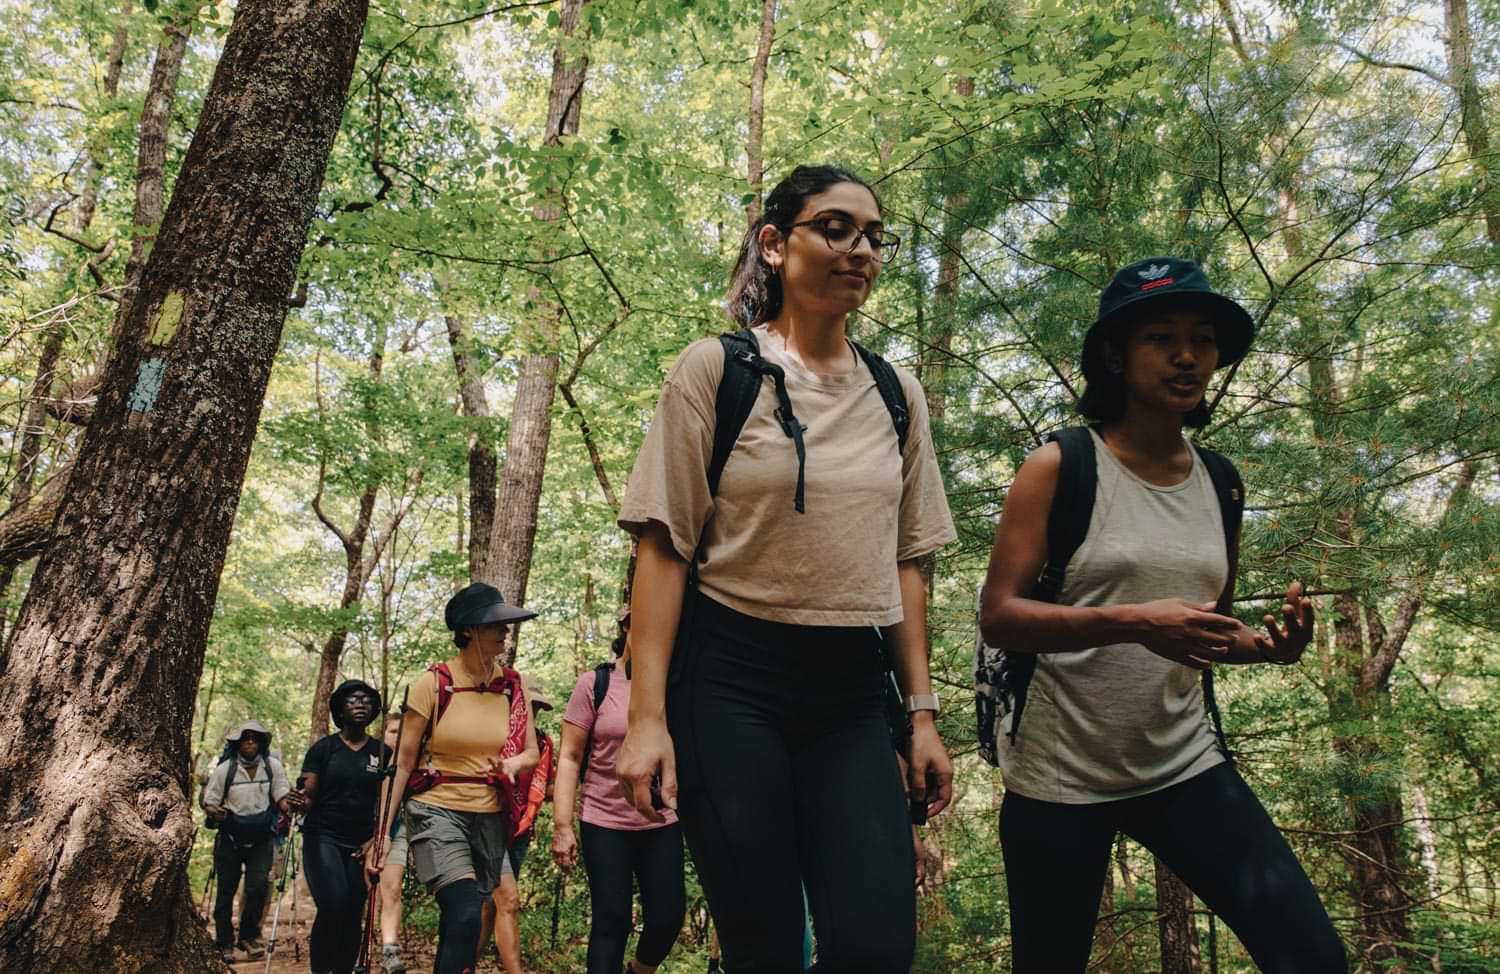 group of women going on a hike together